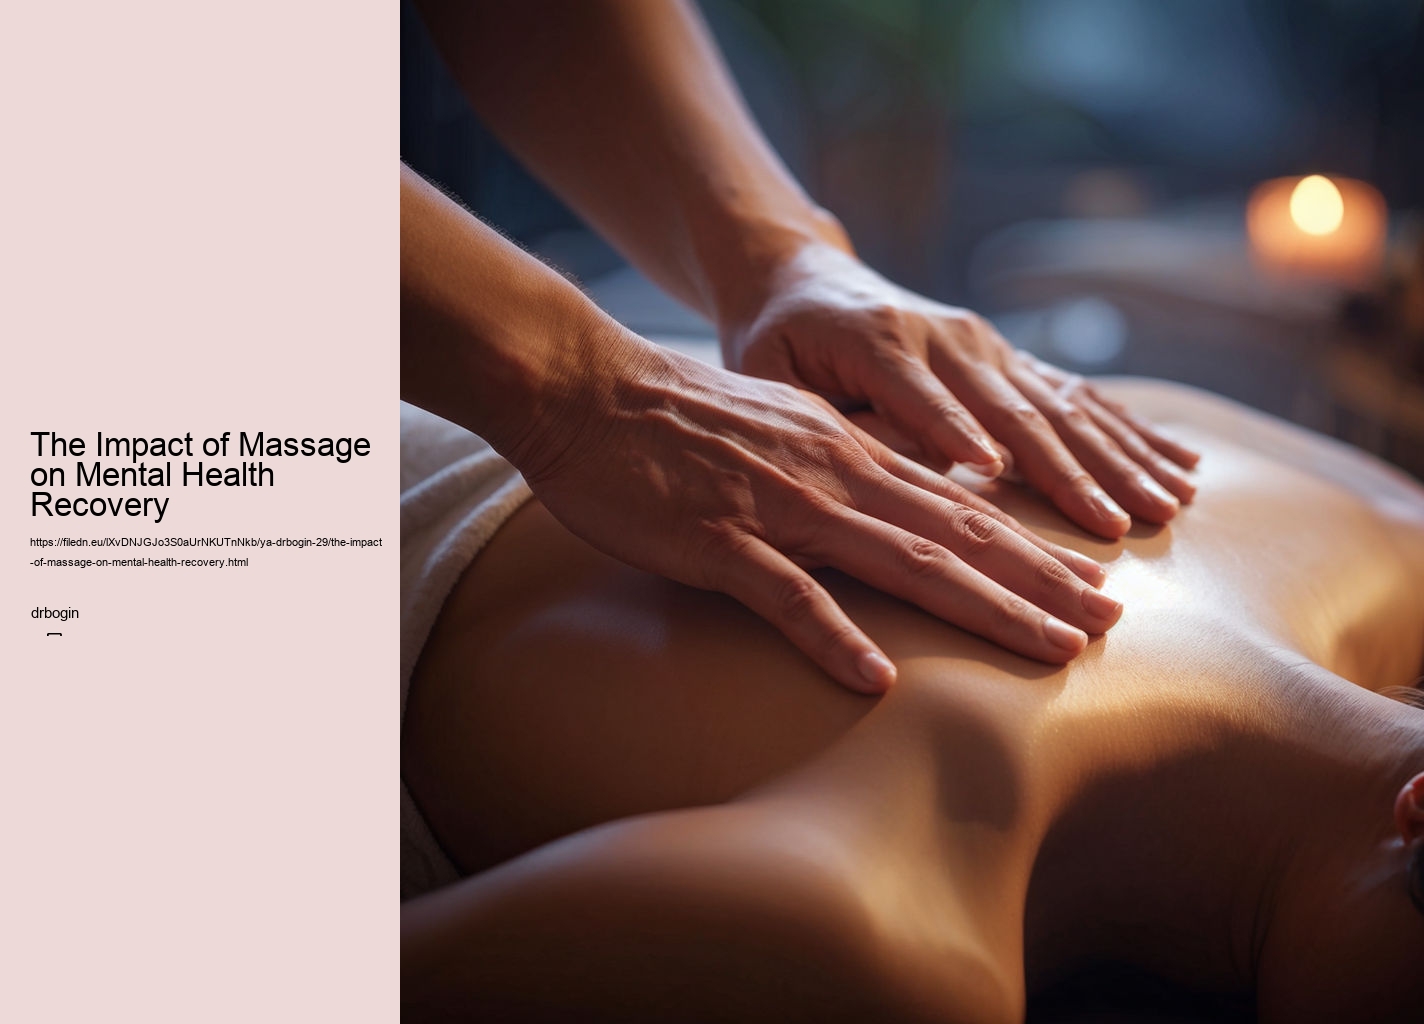 The Impact of Massage on Mental Health Recovery